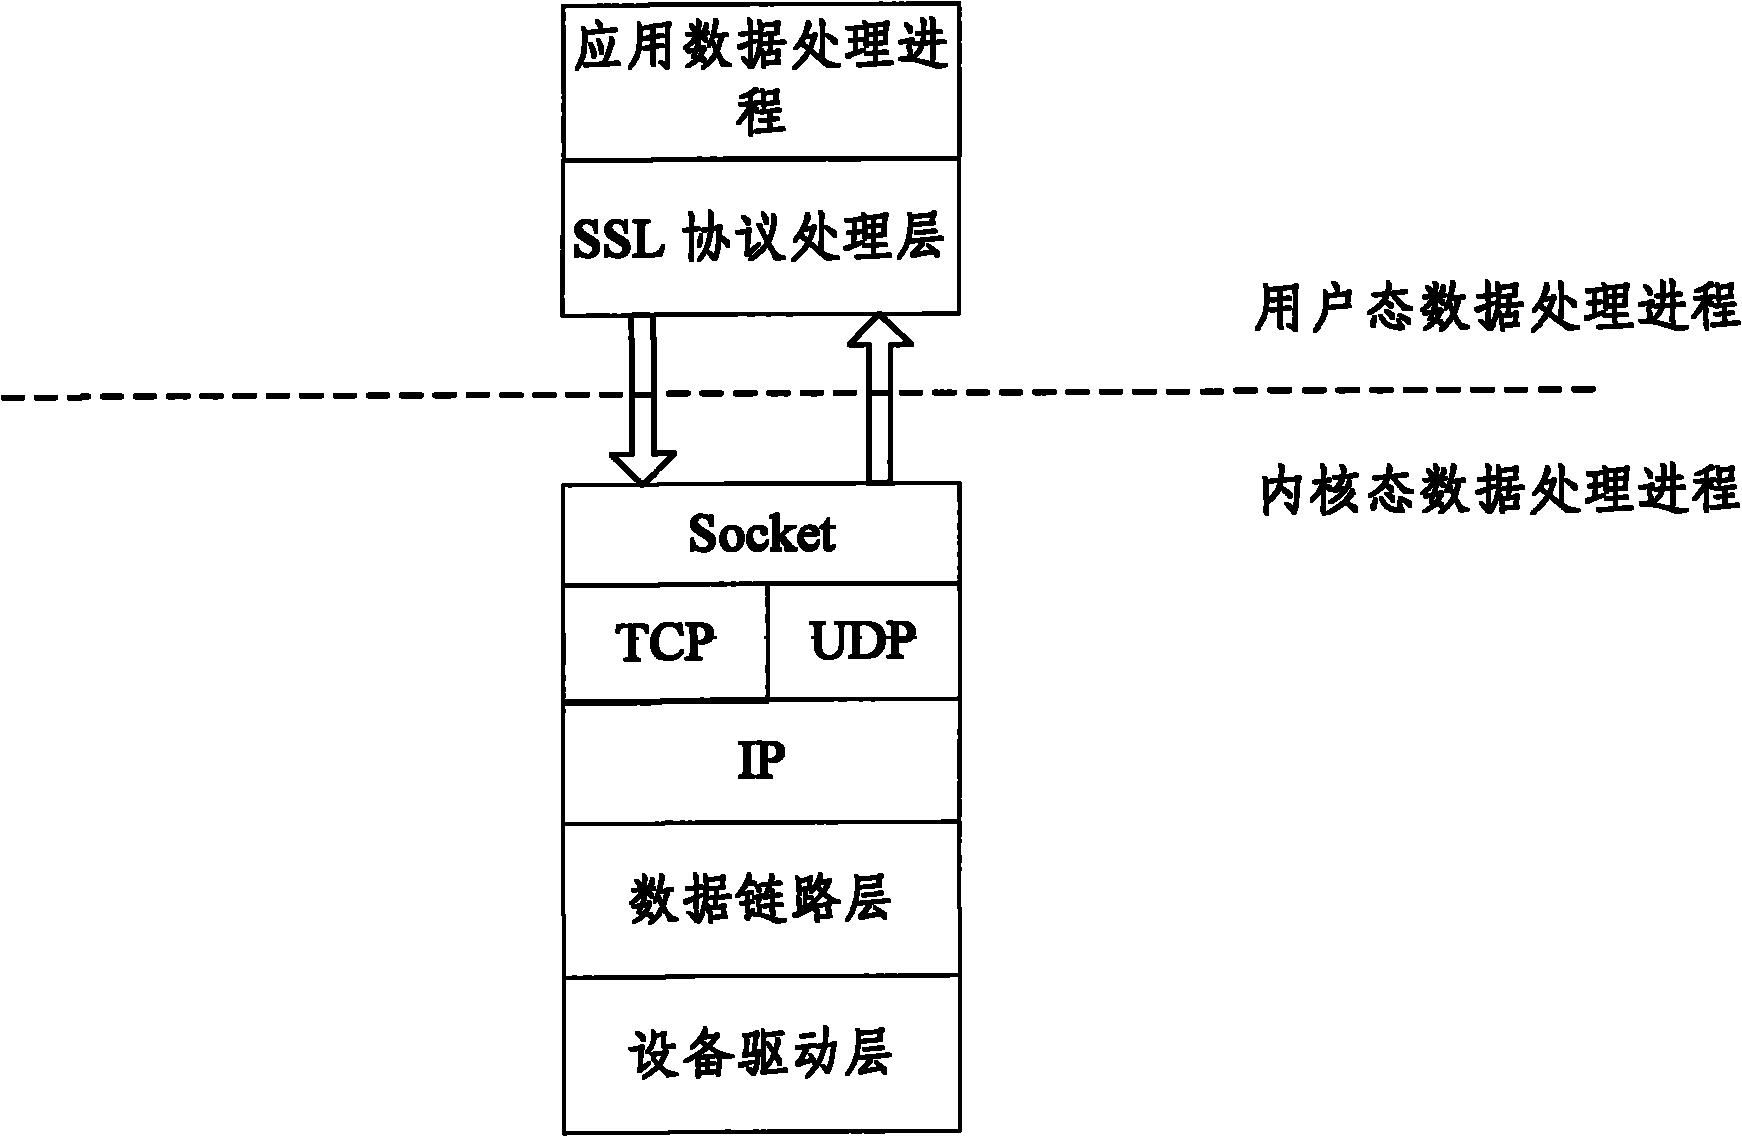 Protocol stack system structure for SSL VPN and data processing method